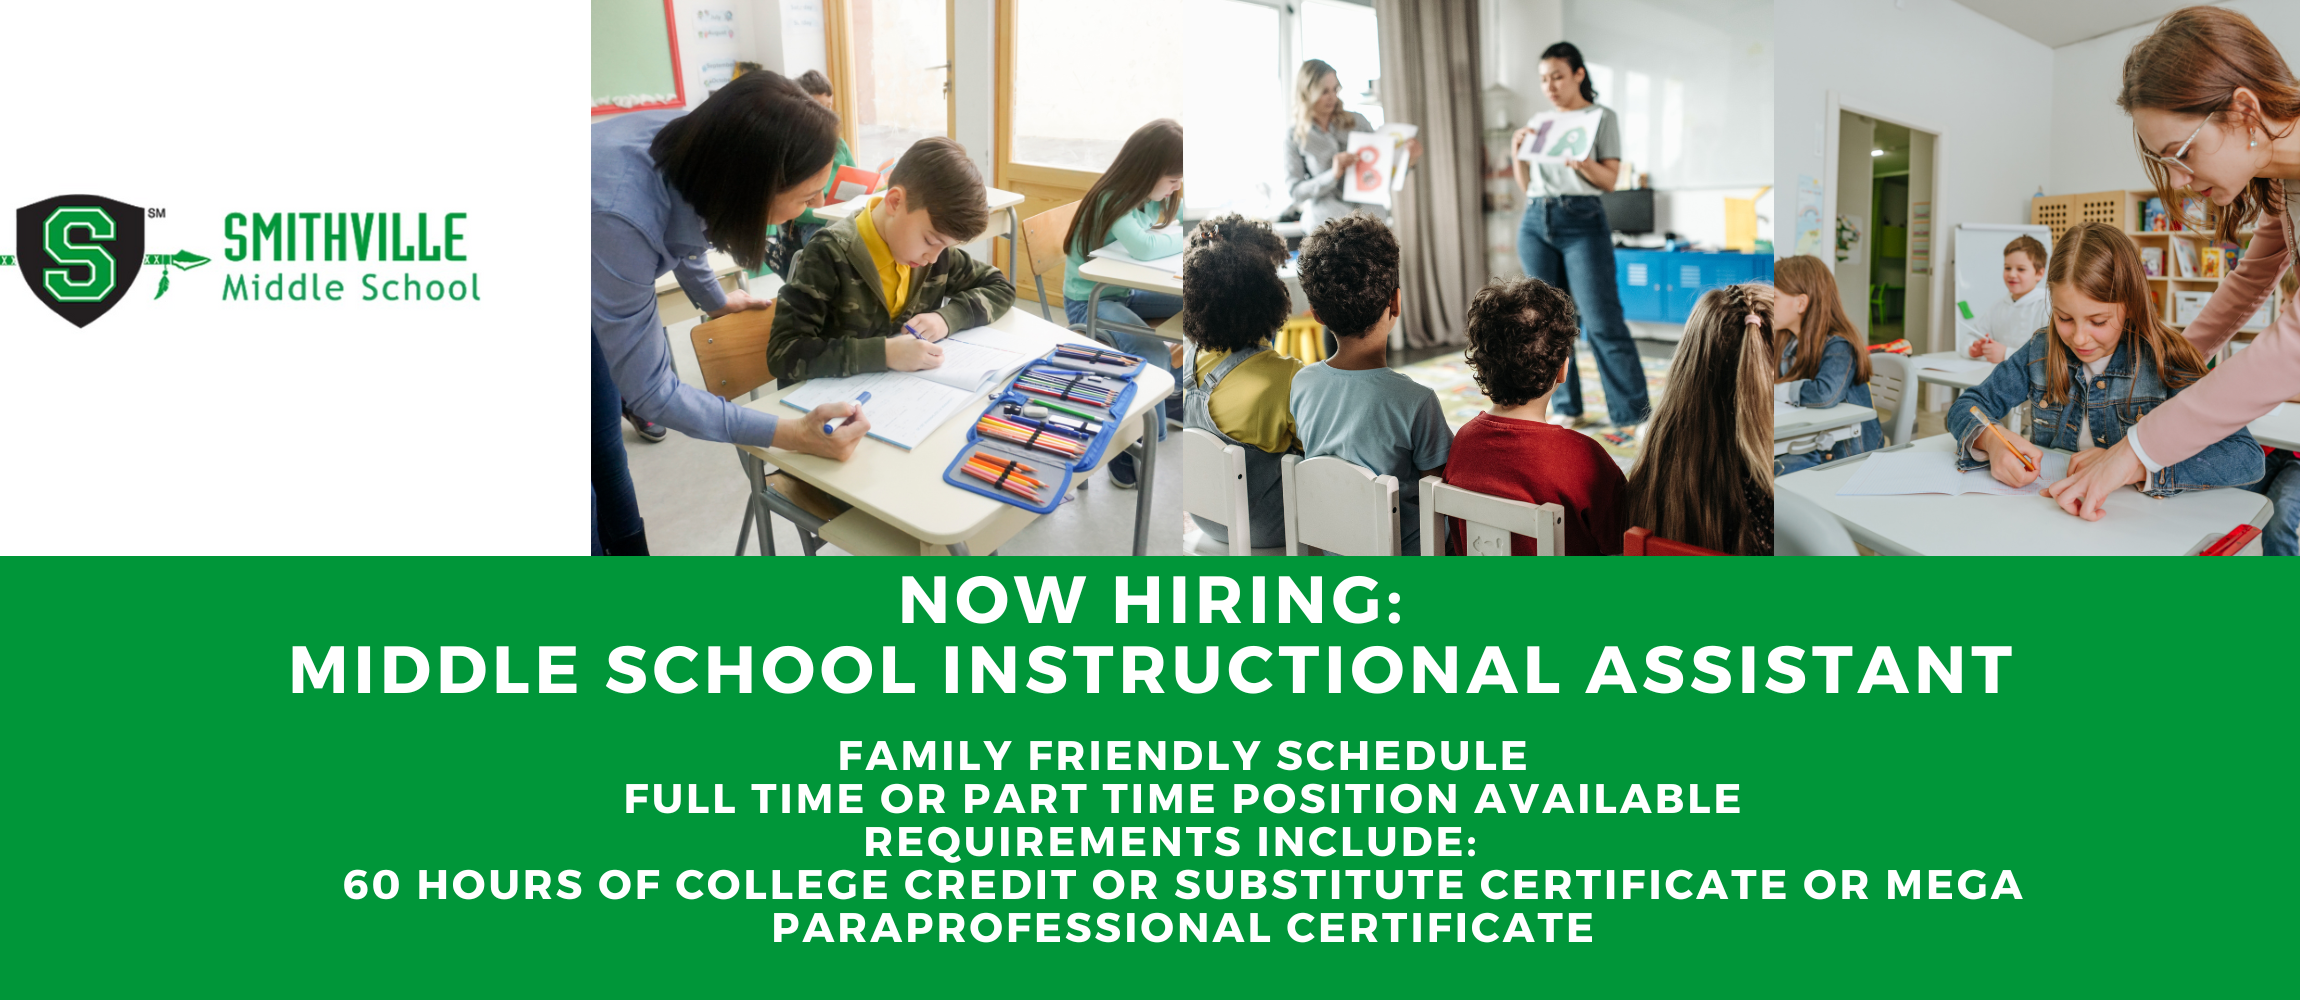 now hiring: middle school instructional assistant, family friendly schedule full time or part time position available requirements include:   60 hours of college credit or substitute certificate or mega paraprofessional certificate